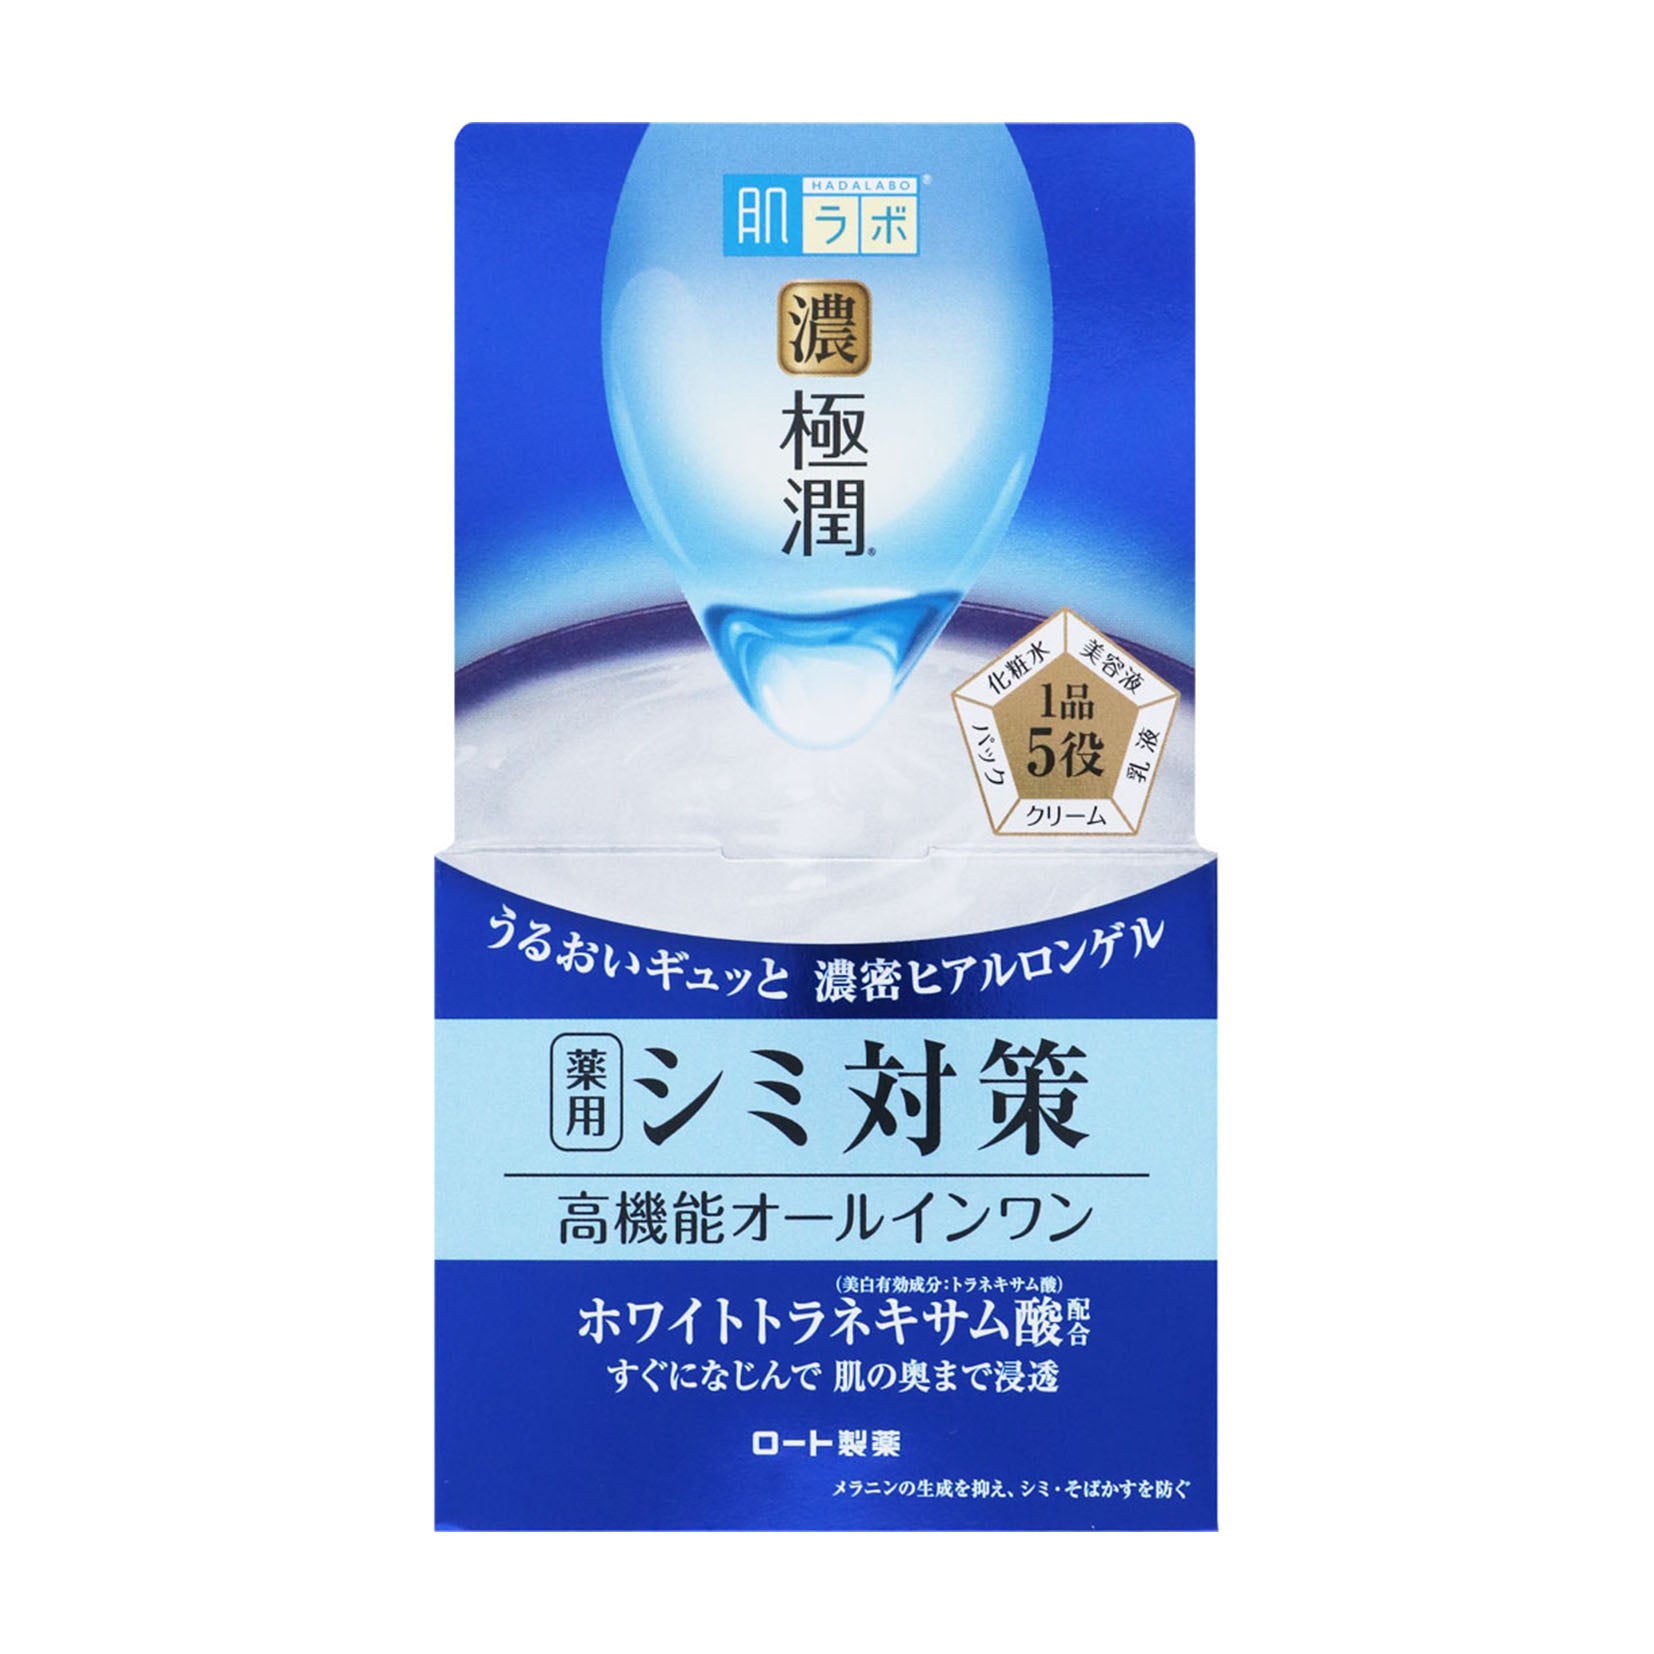 Rohto Hadalabo Gokujun Whitening All In One Perfect Gel - 100g - Harajuku Culture Japan - Japanease Products Store Beauty and Stationery